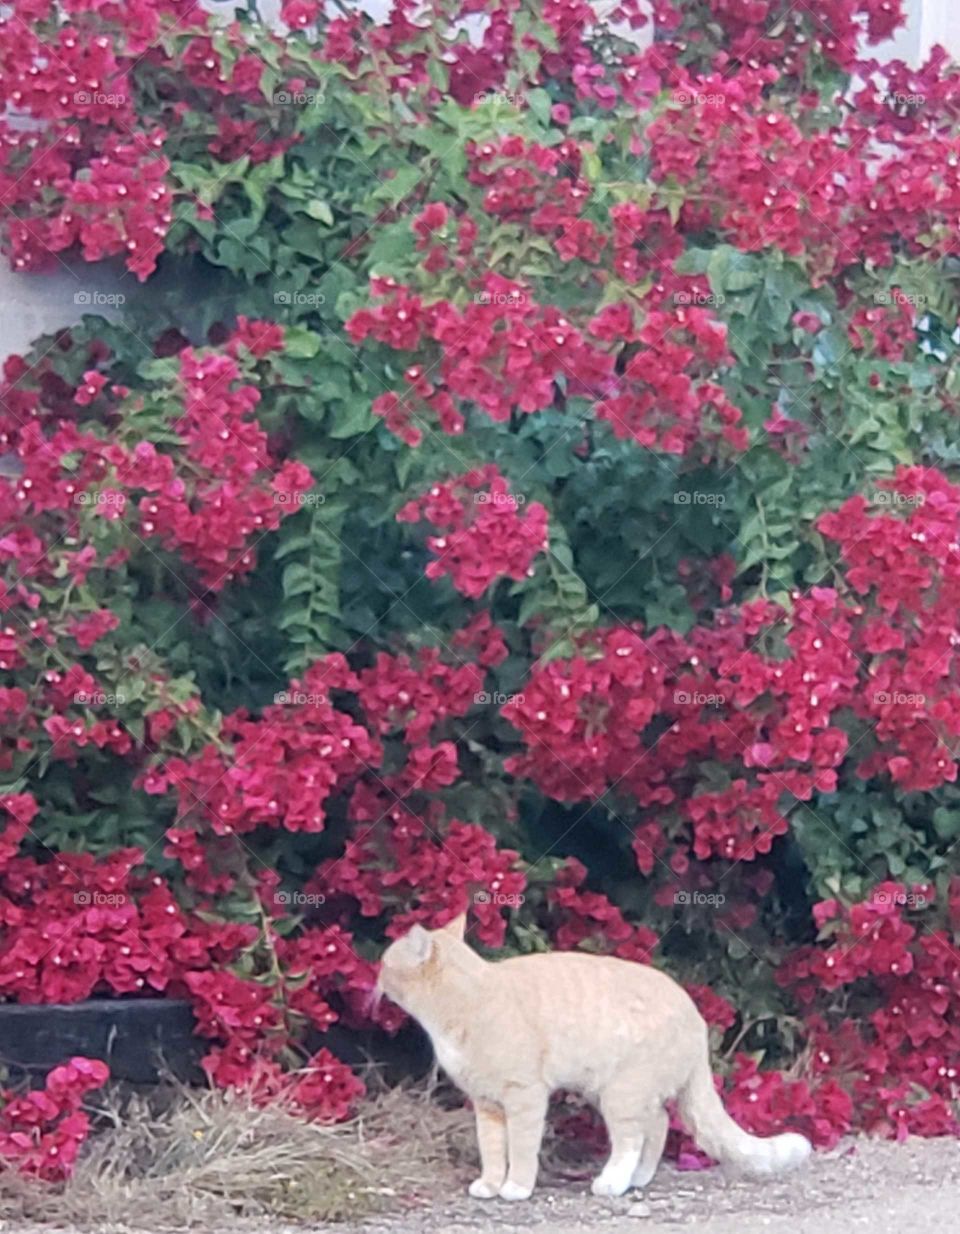 sometimes we must stop to smell the flowers